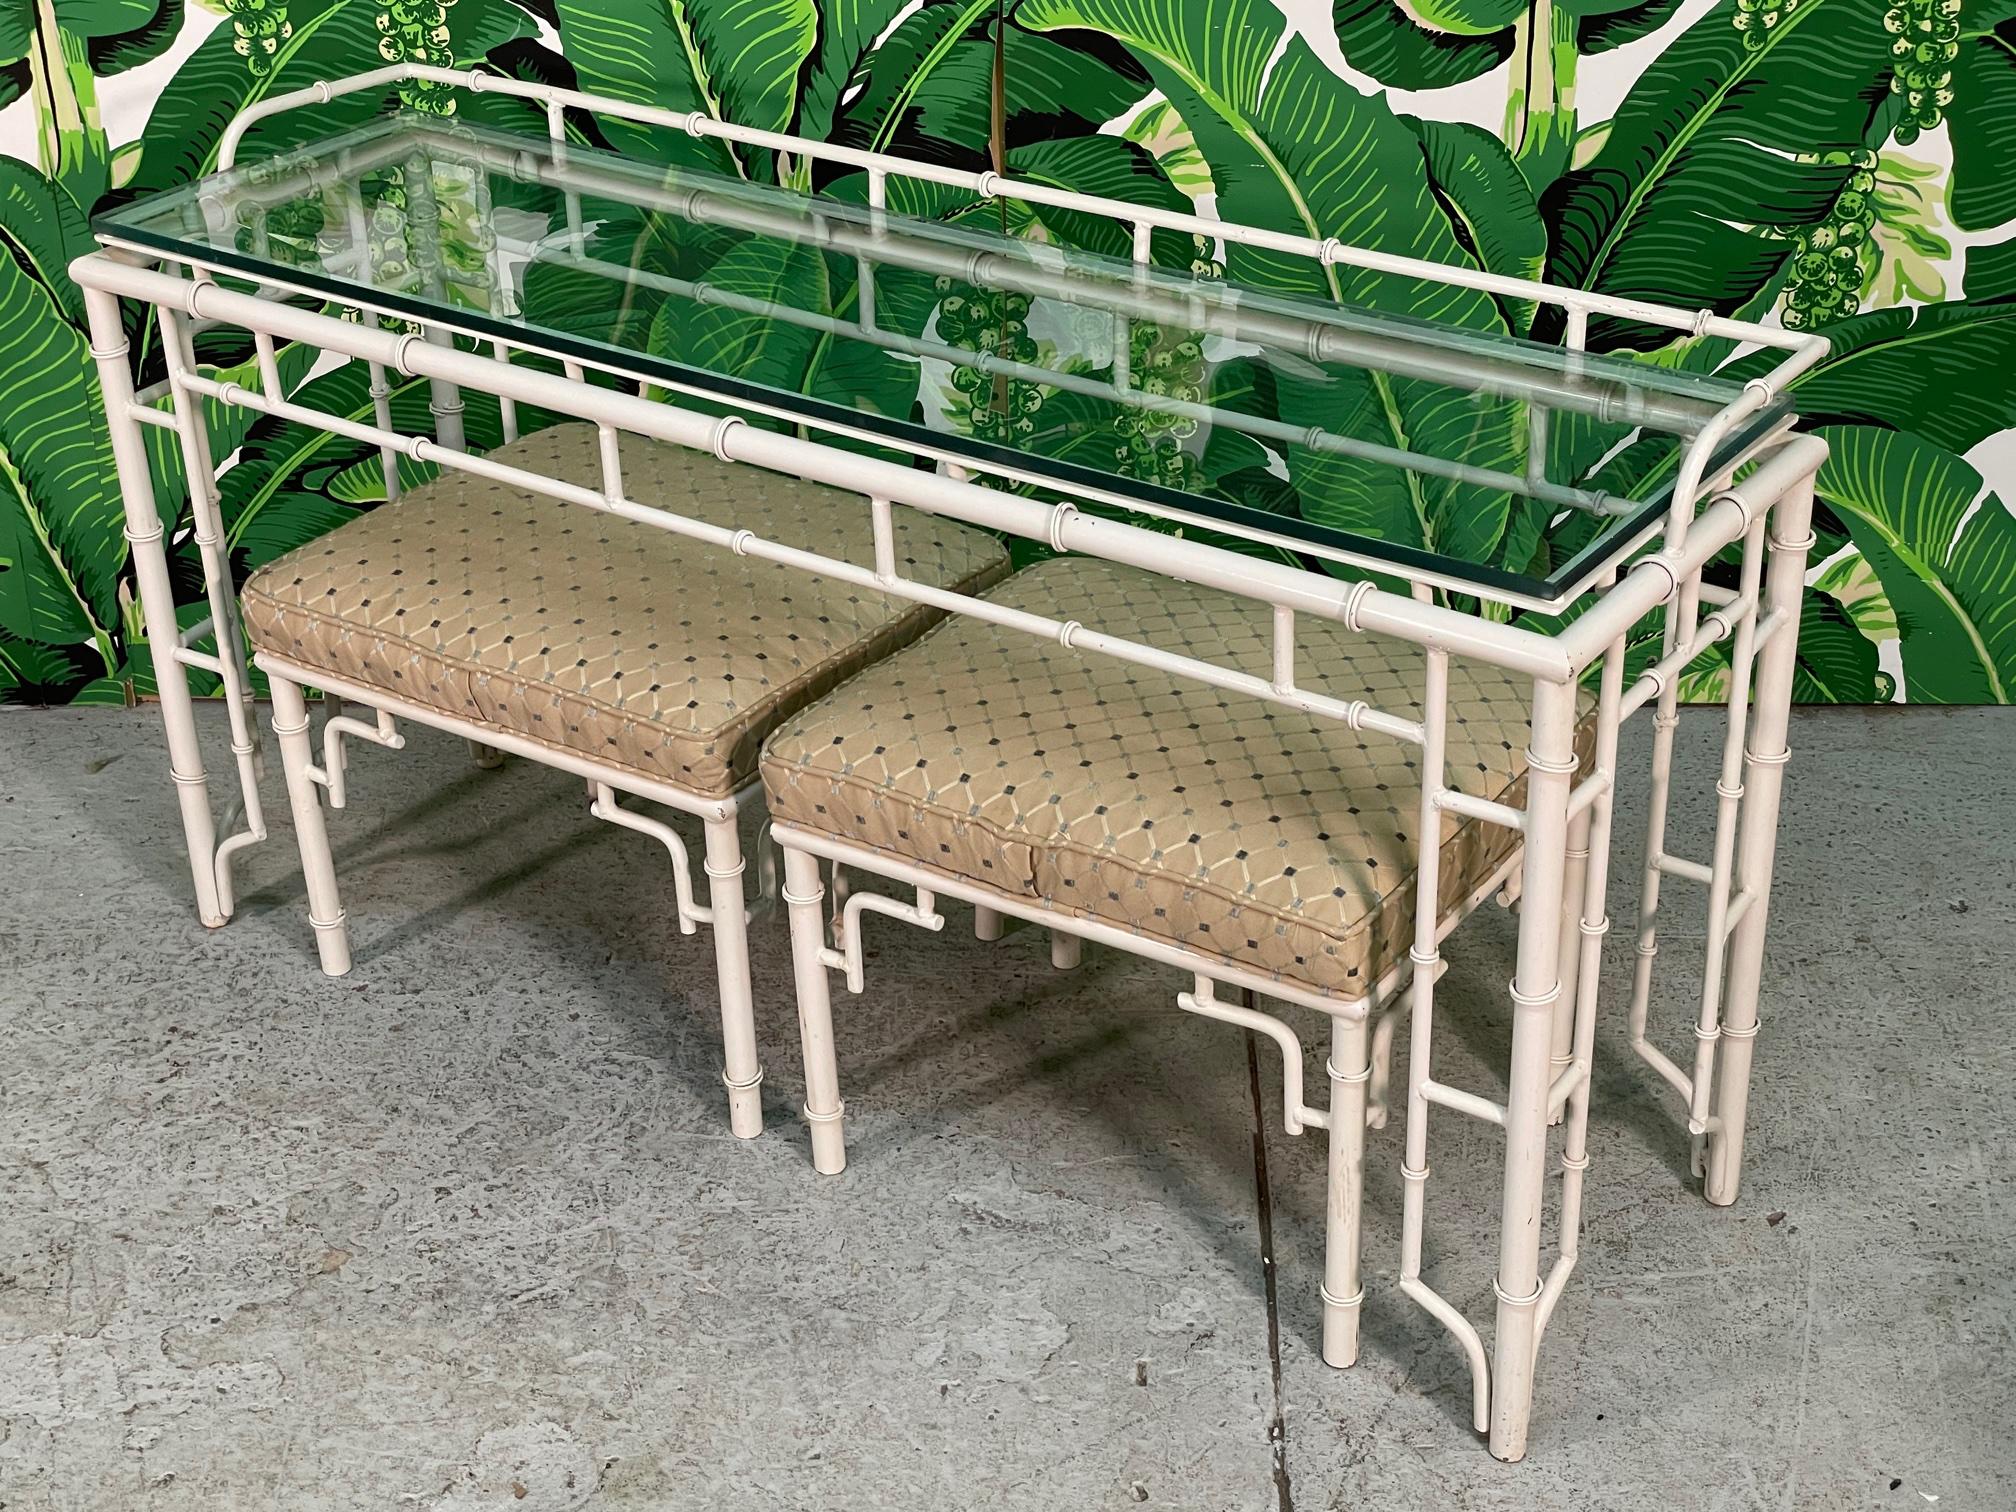 Vintage metal console table features faux bamboo detailing and matching footstools. Very similar to Warren Kessler. Very heavy and structurally solid. Good condition with minor imperfections consistent with age.
Table measures 54